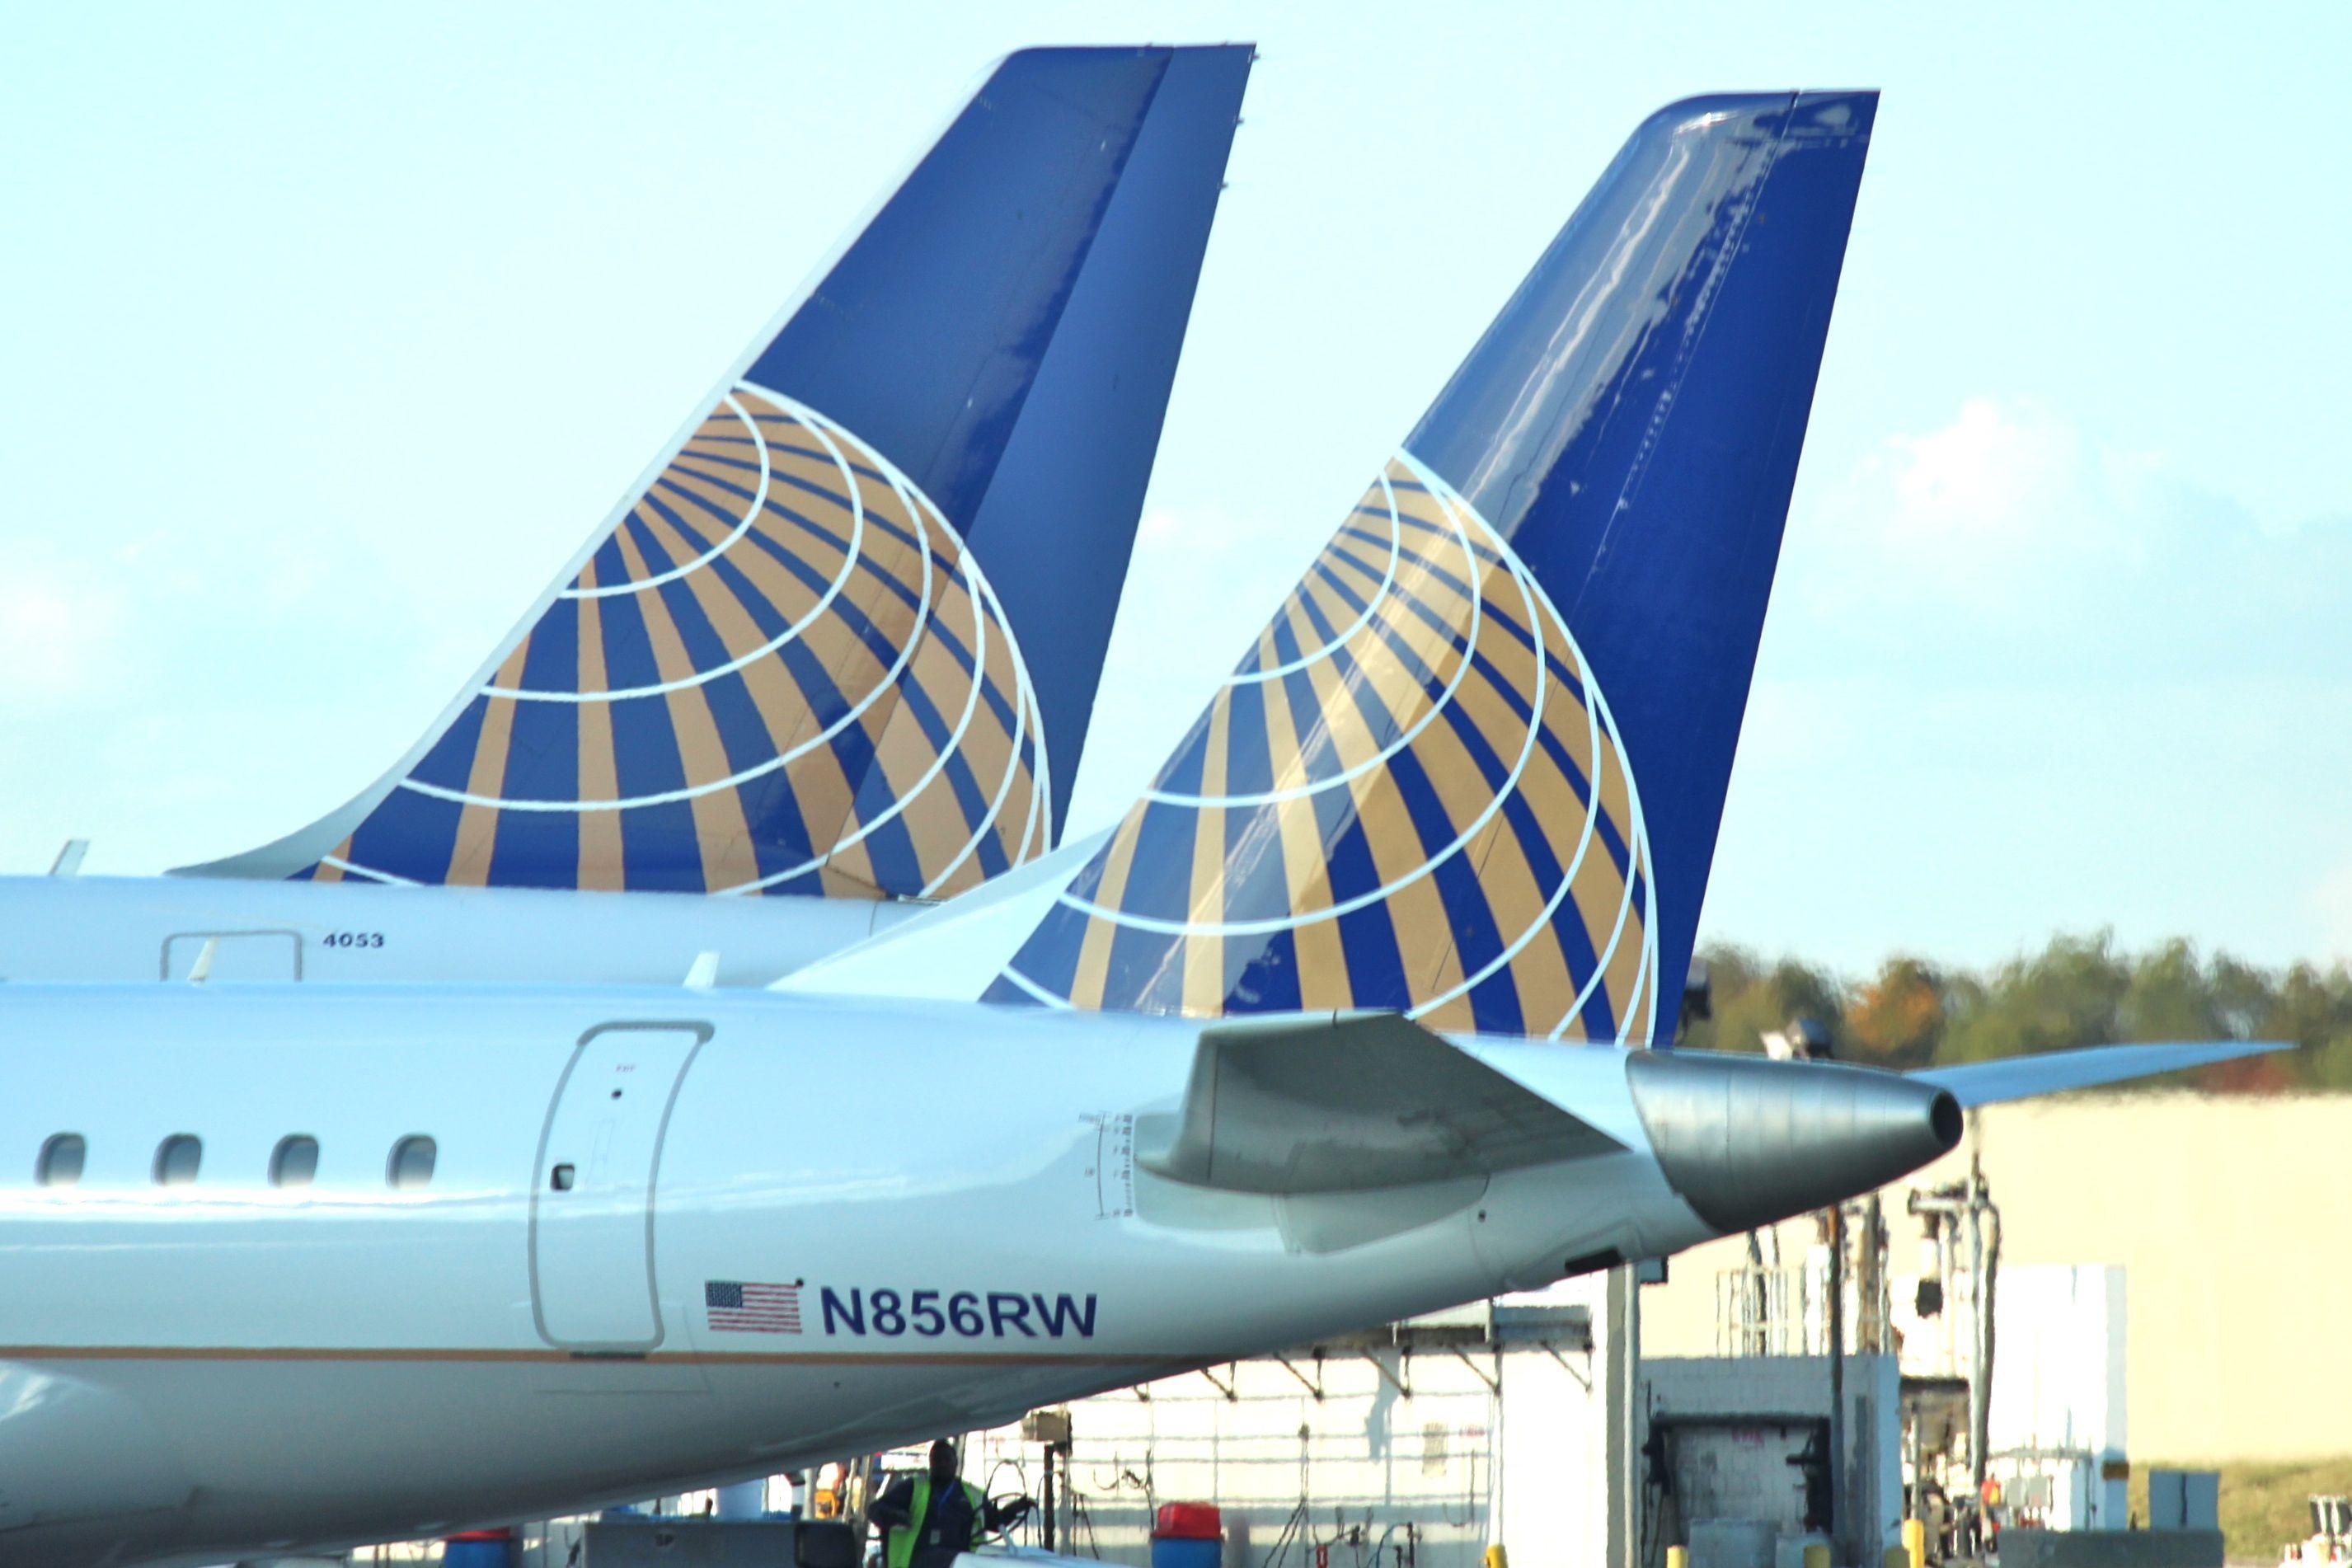 United Airlines Tail Logo - 6 Reasons Why United Should Re-introduce The “Tulip” | airlineguys